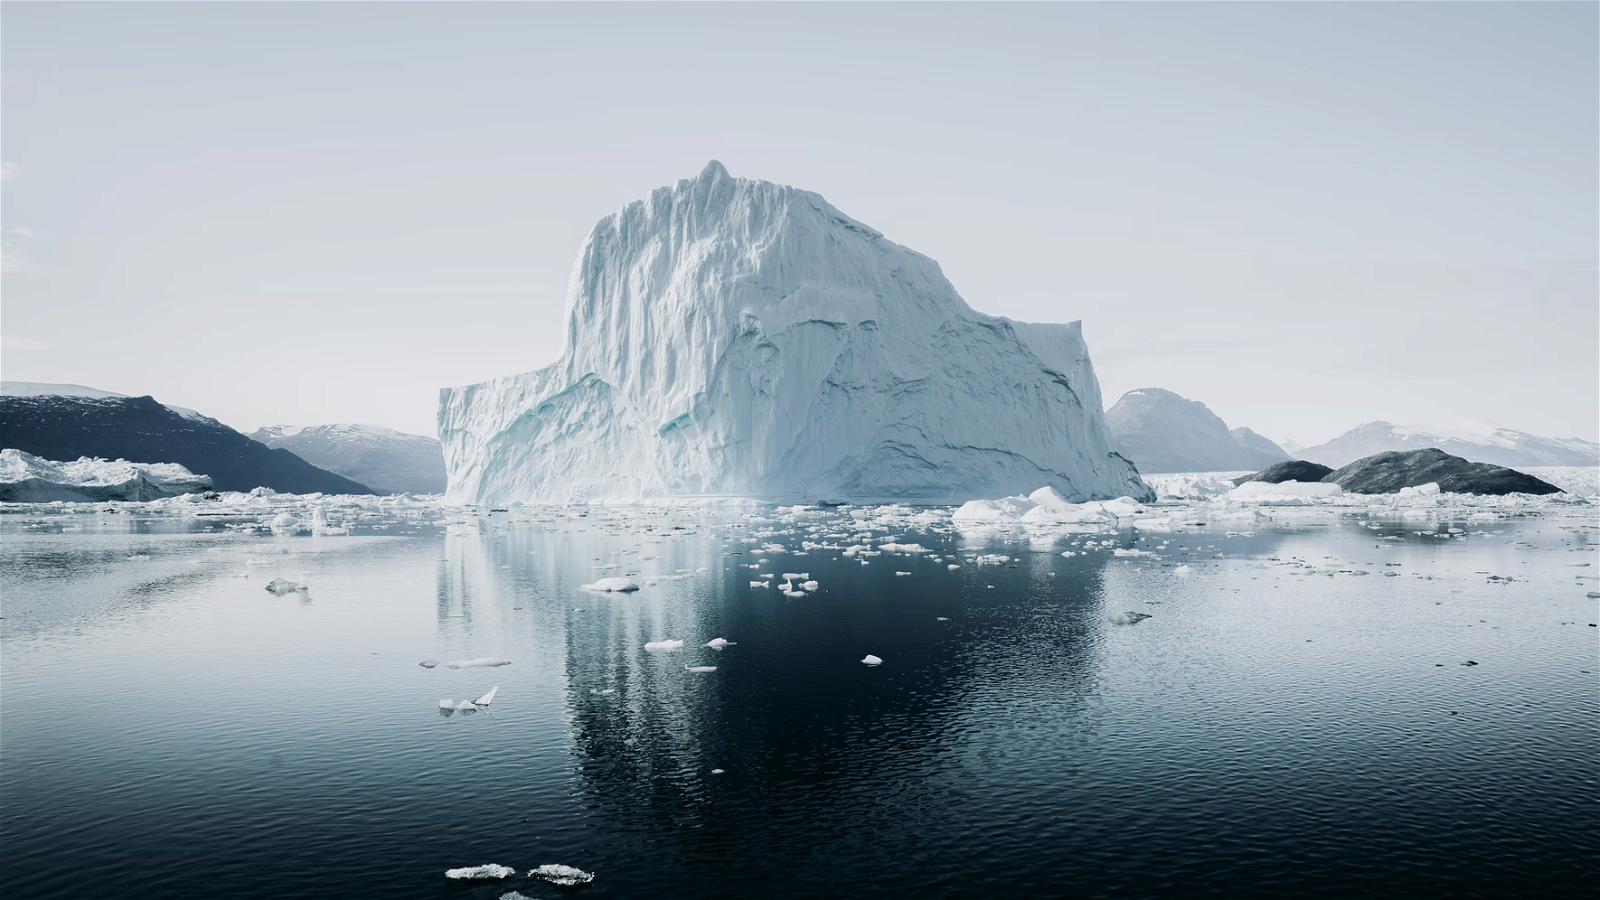 Climate tipping points: The Arctic is a bellwether for irreversible change